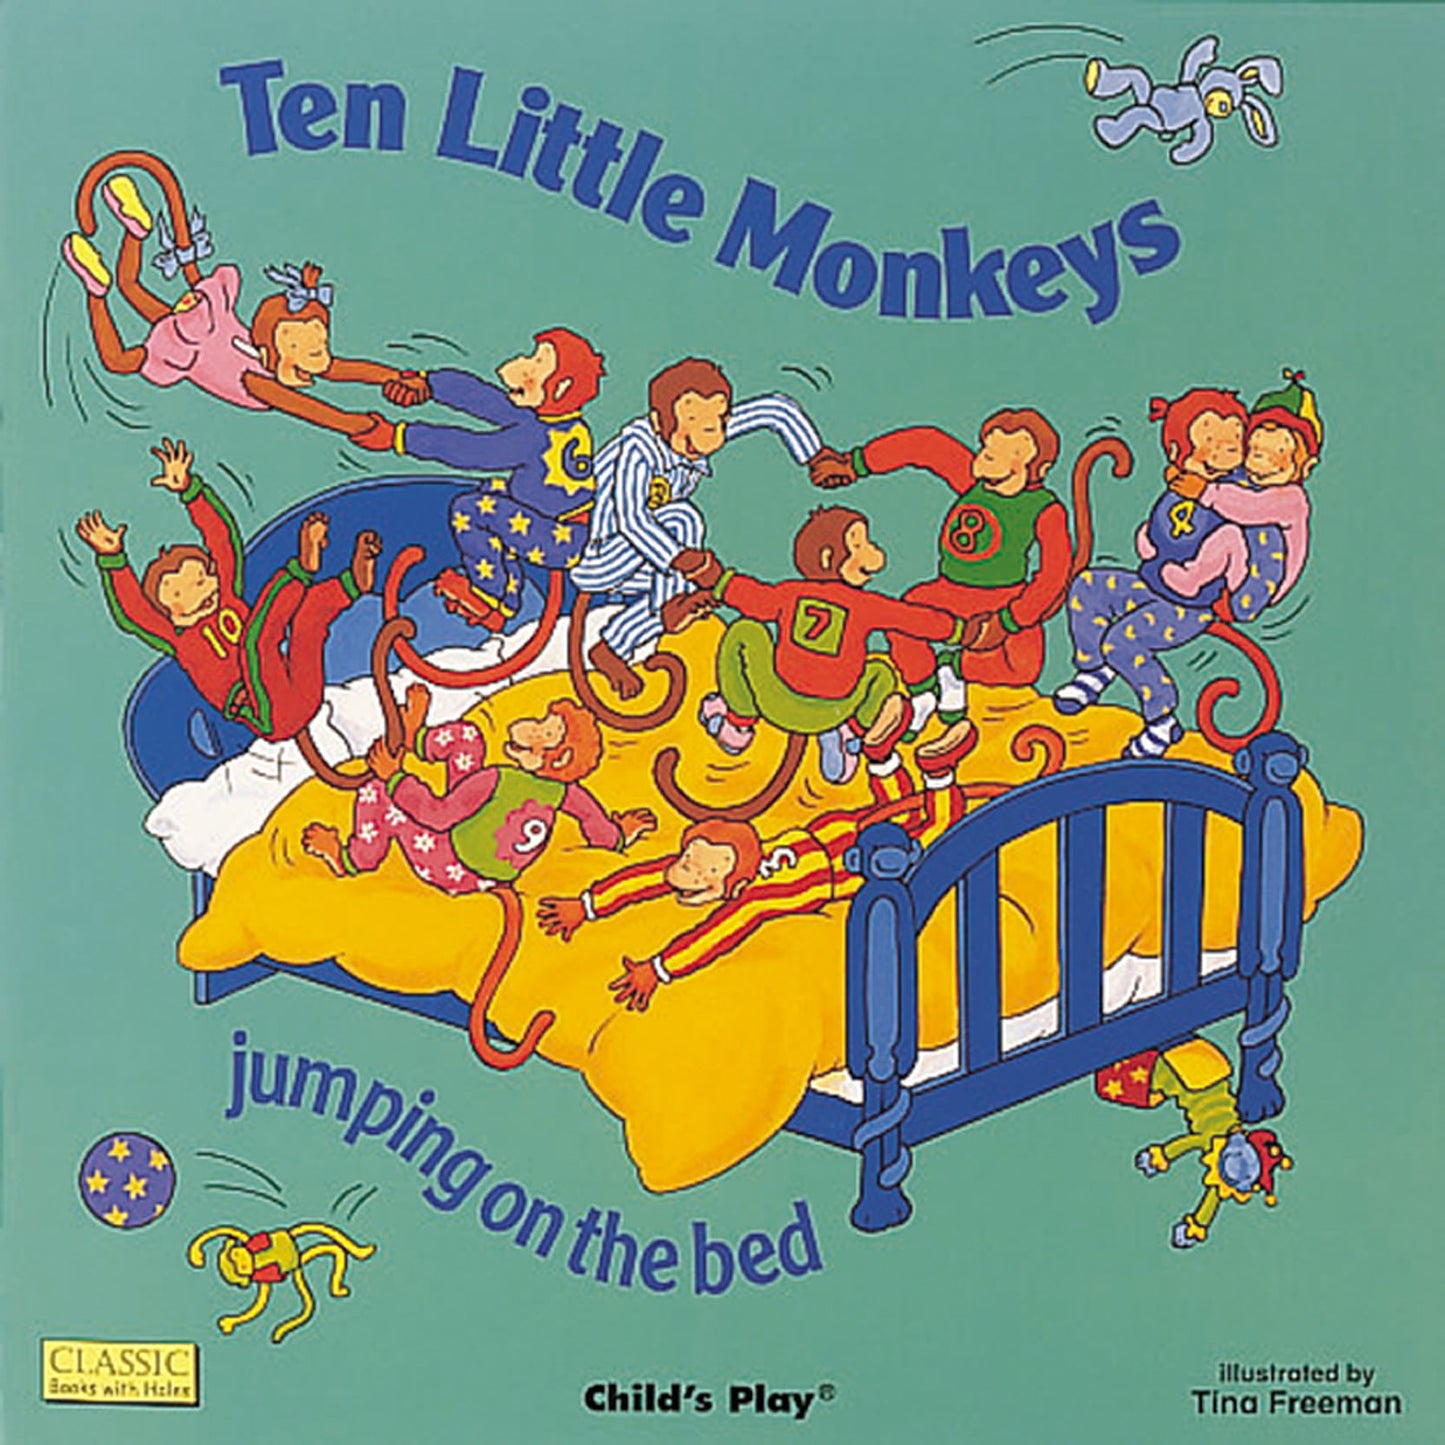 Ten Little Monkeys Jumping on the Bed (Softcover Edition)